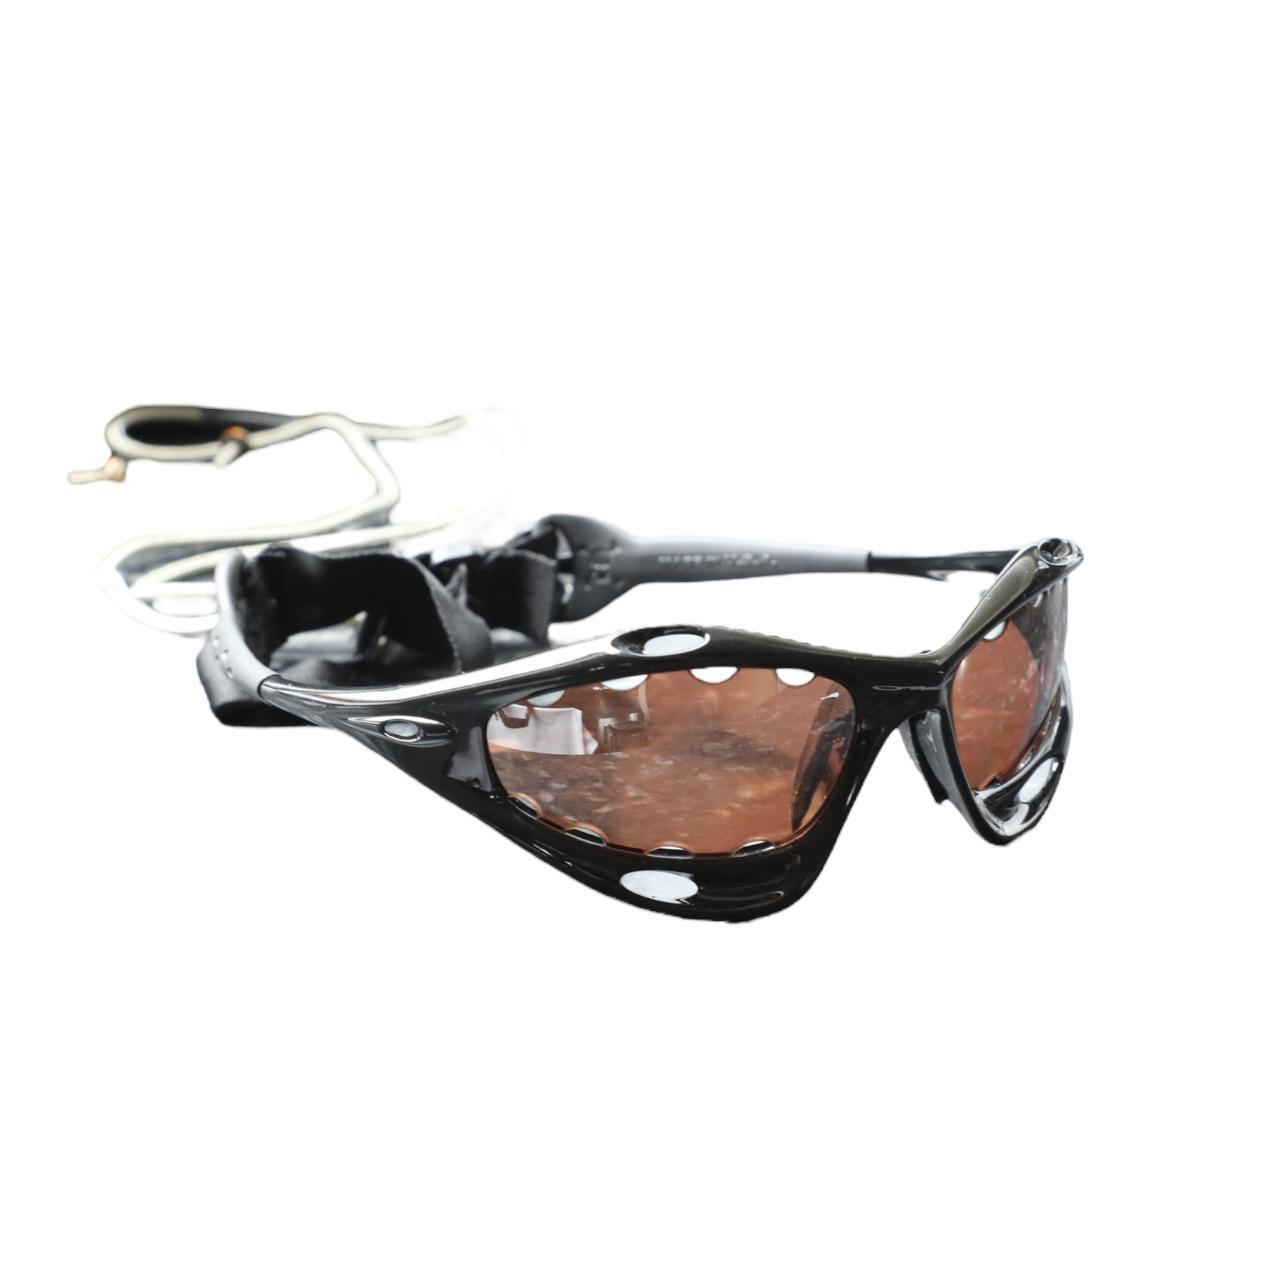 Oakley ‘Racing Jacket’ Jet Black/Persimmon Vented - Known Source